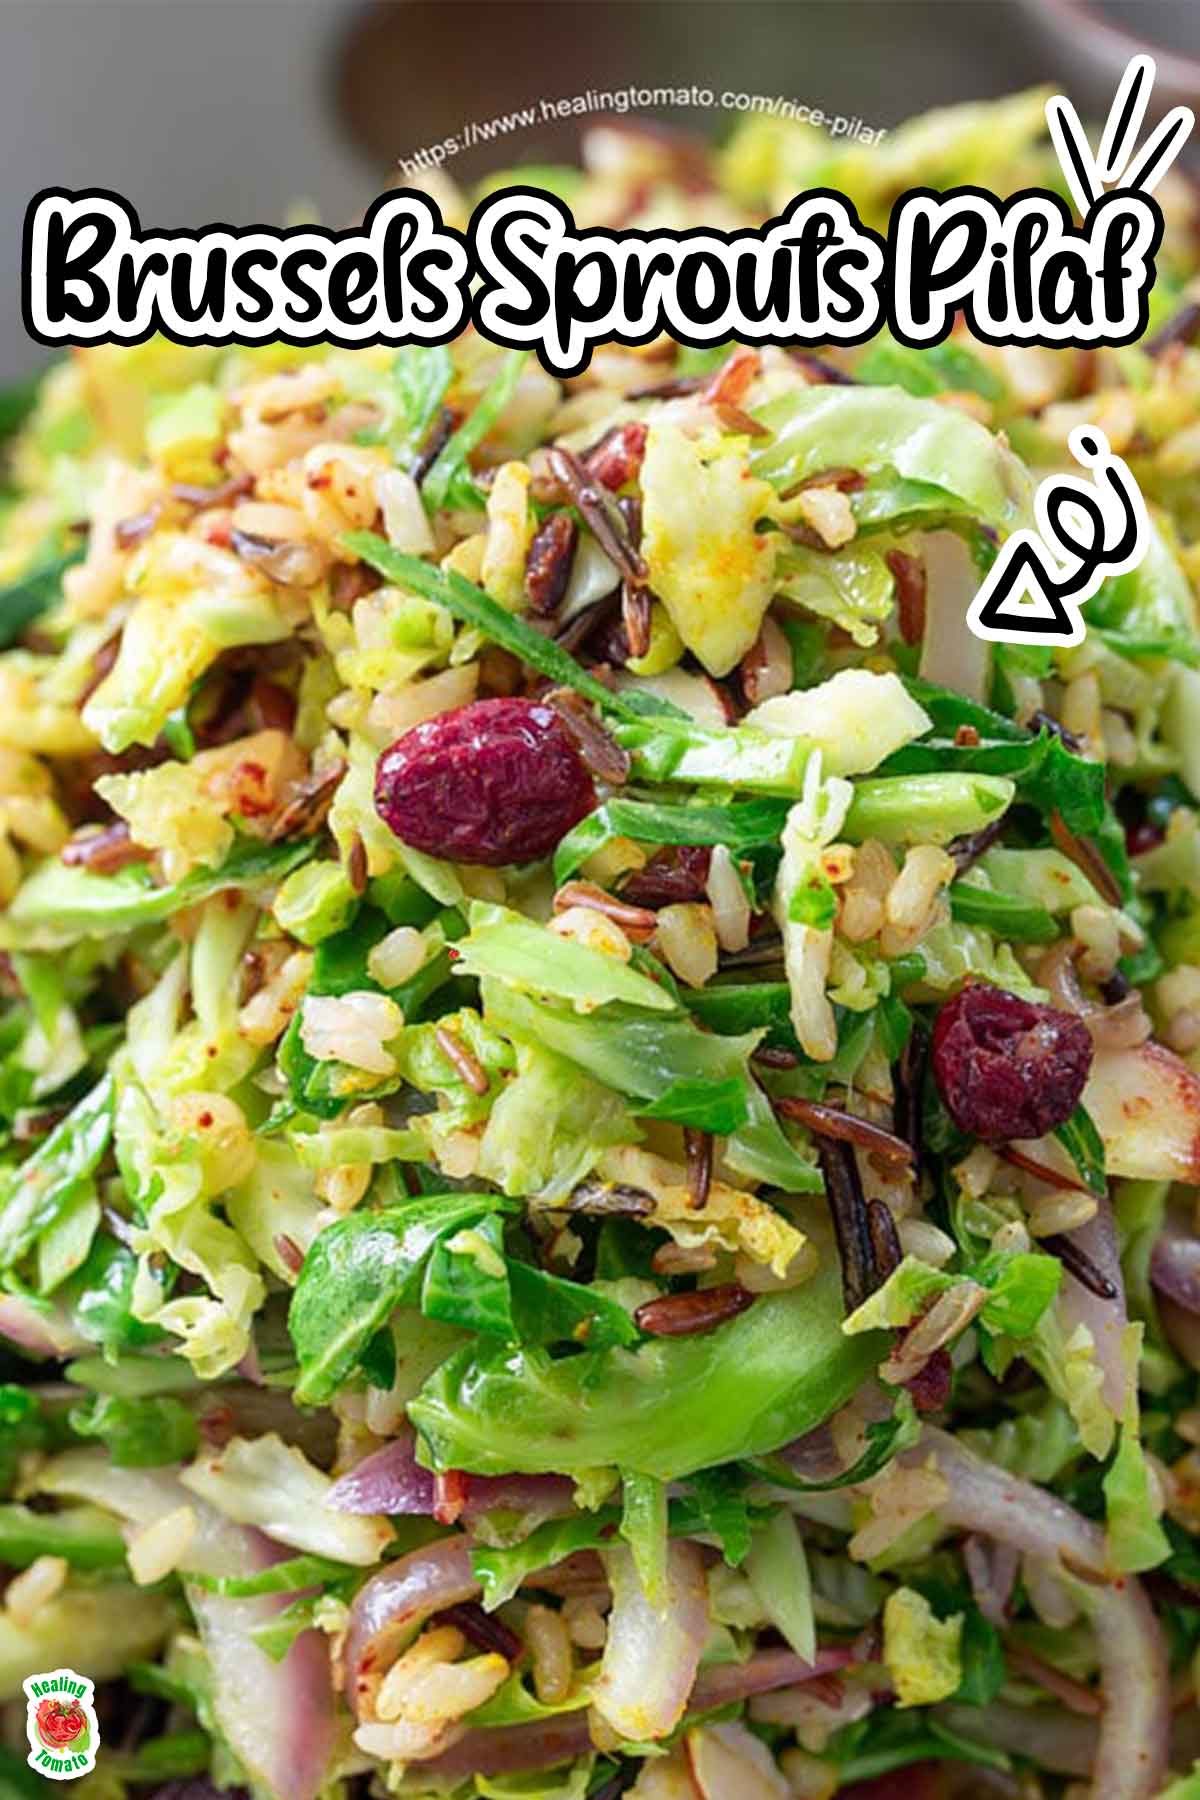 Closeup view of the Brussels sprouts pilaf with cranberries, wild rice and shredded sprouts